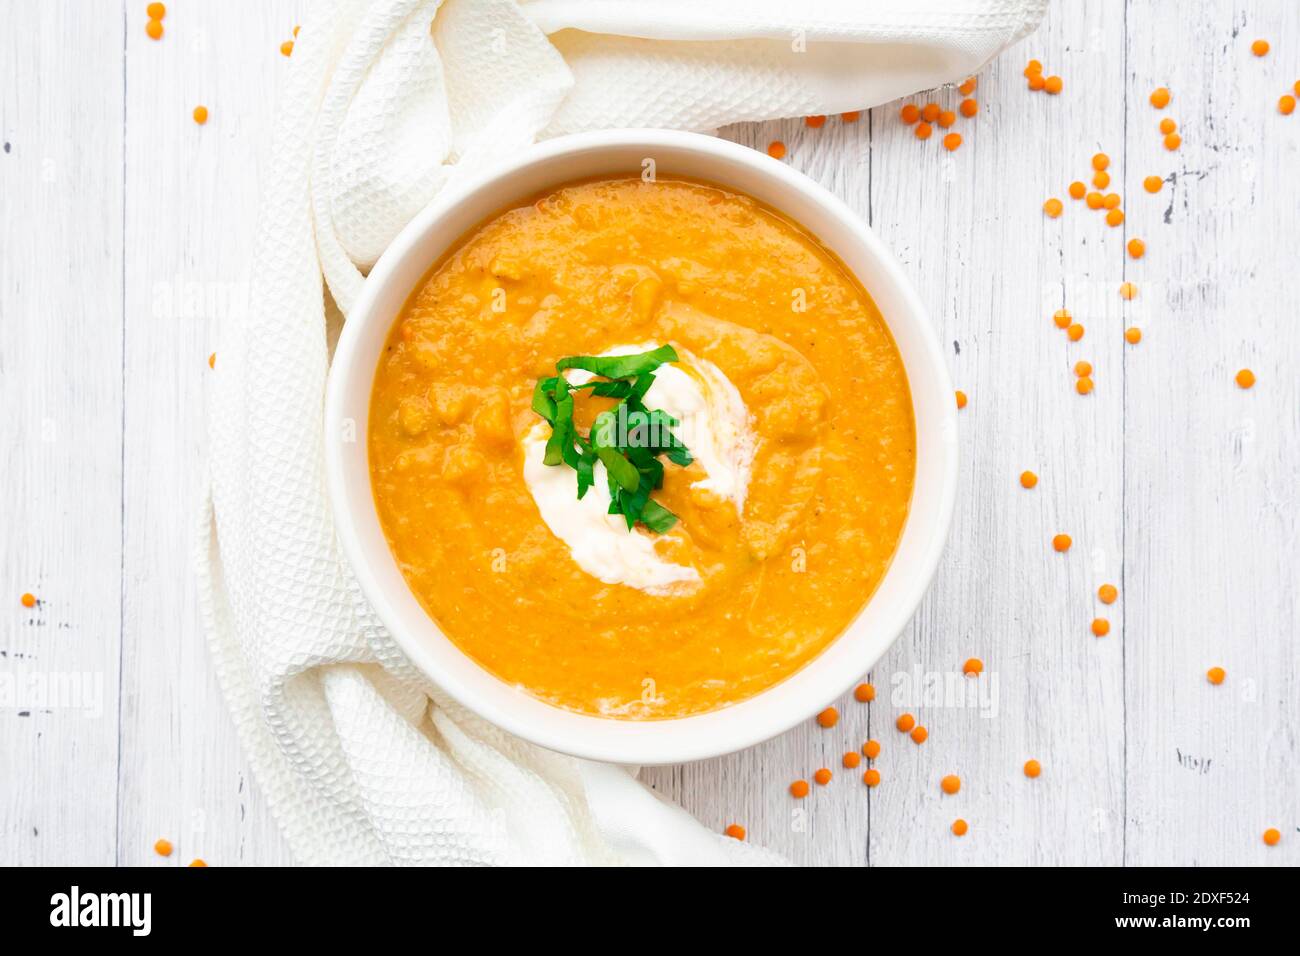 Bowl of vegetarian lentil soup with carrots, orange juice, creme fraiche and parsley Stock Photo